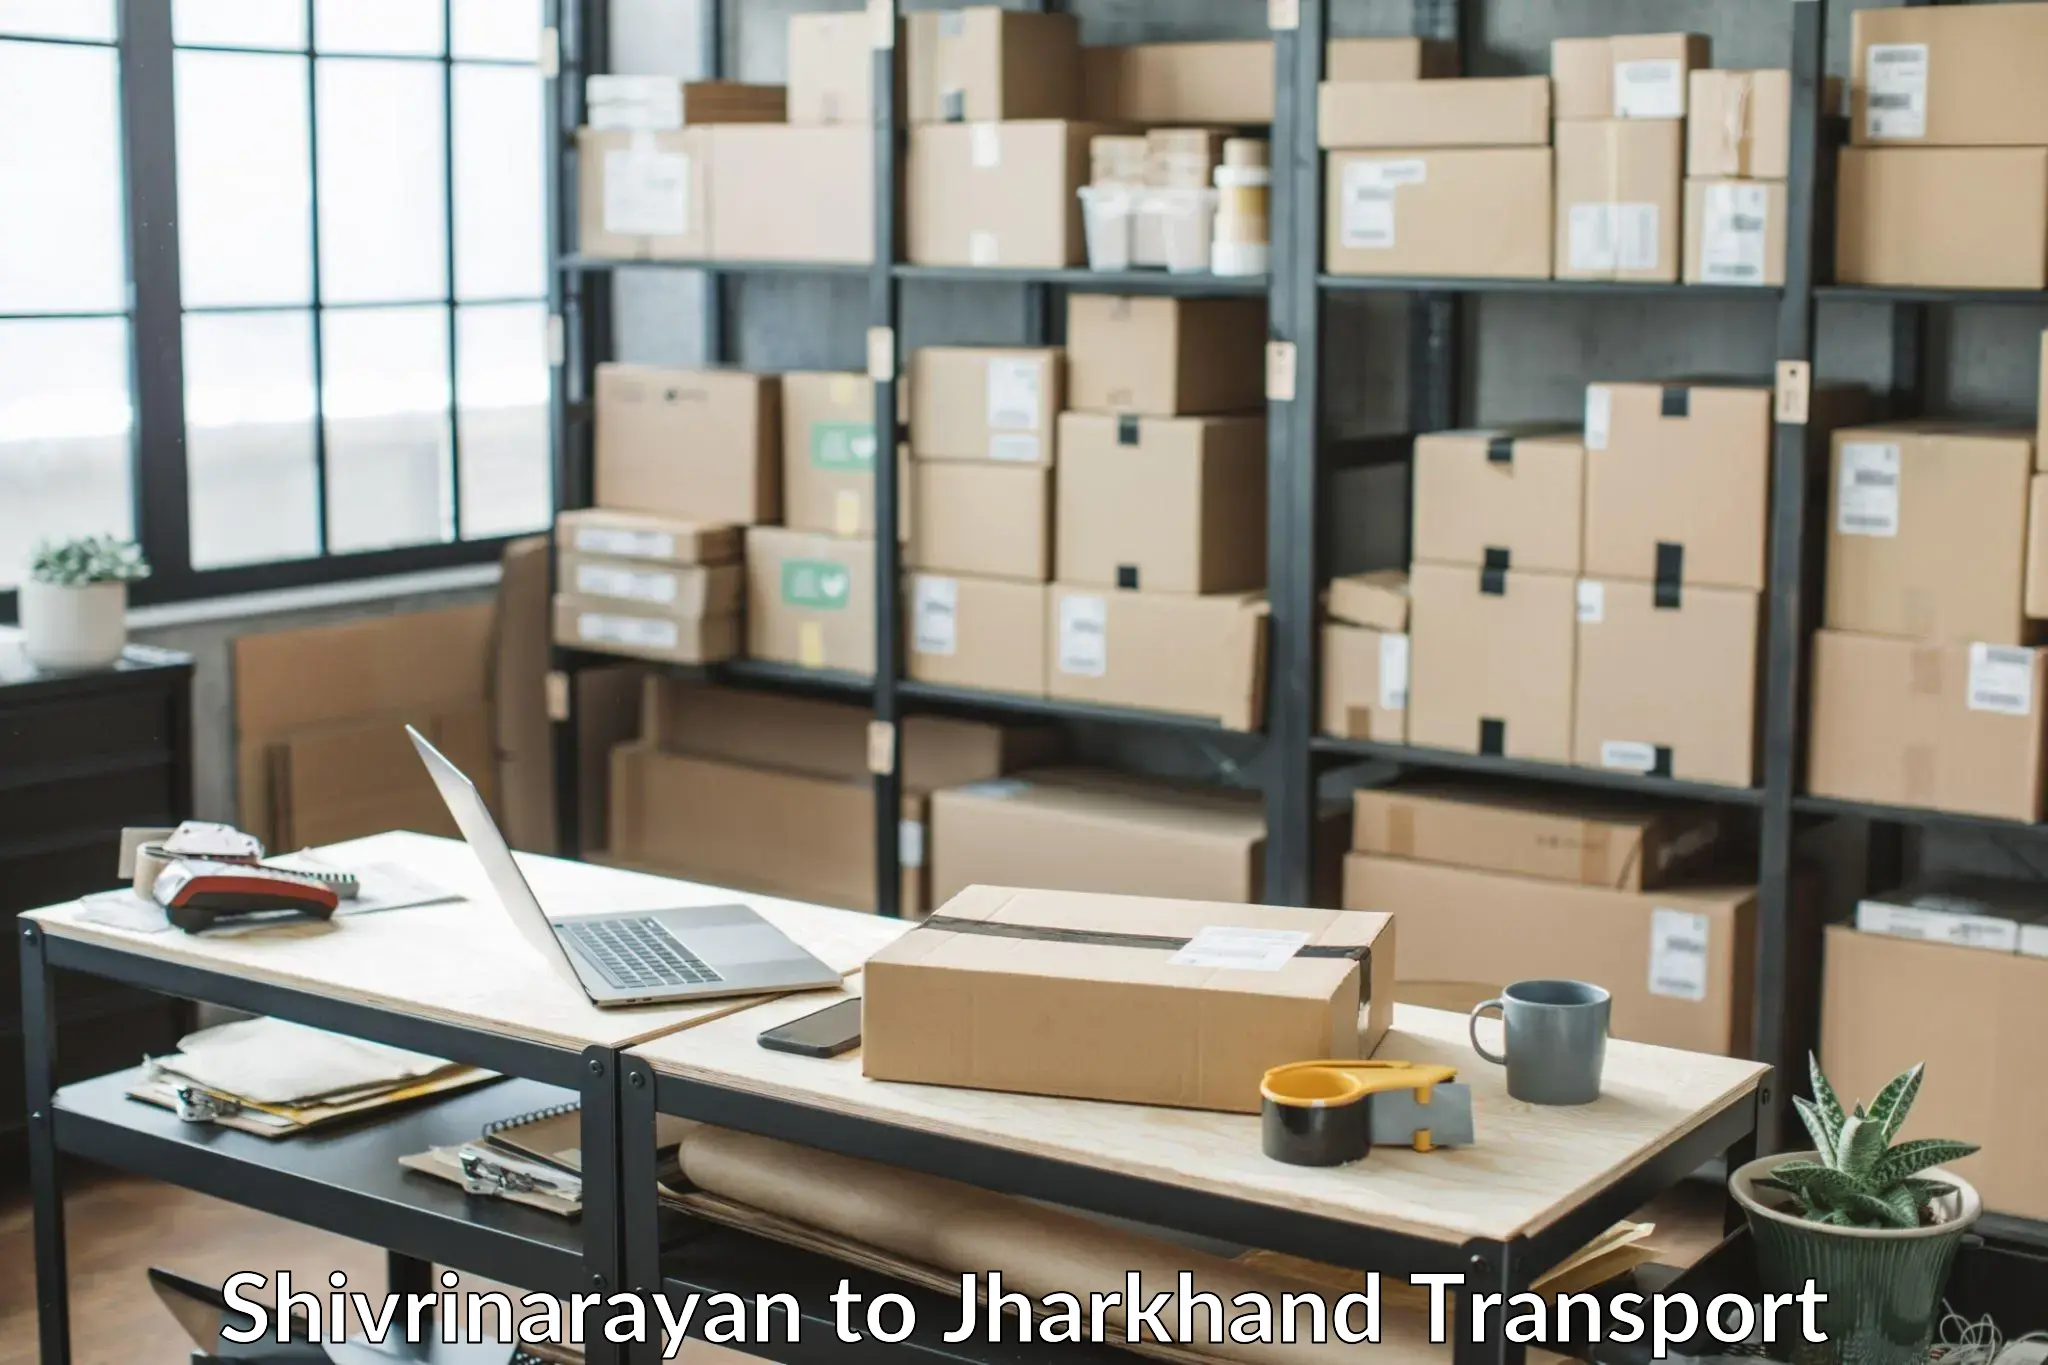 Transport shared services in Shivrinarayan to Peterbar